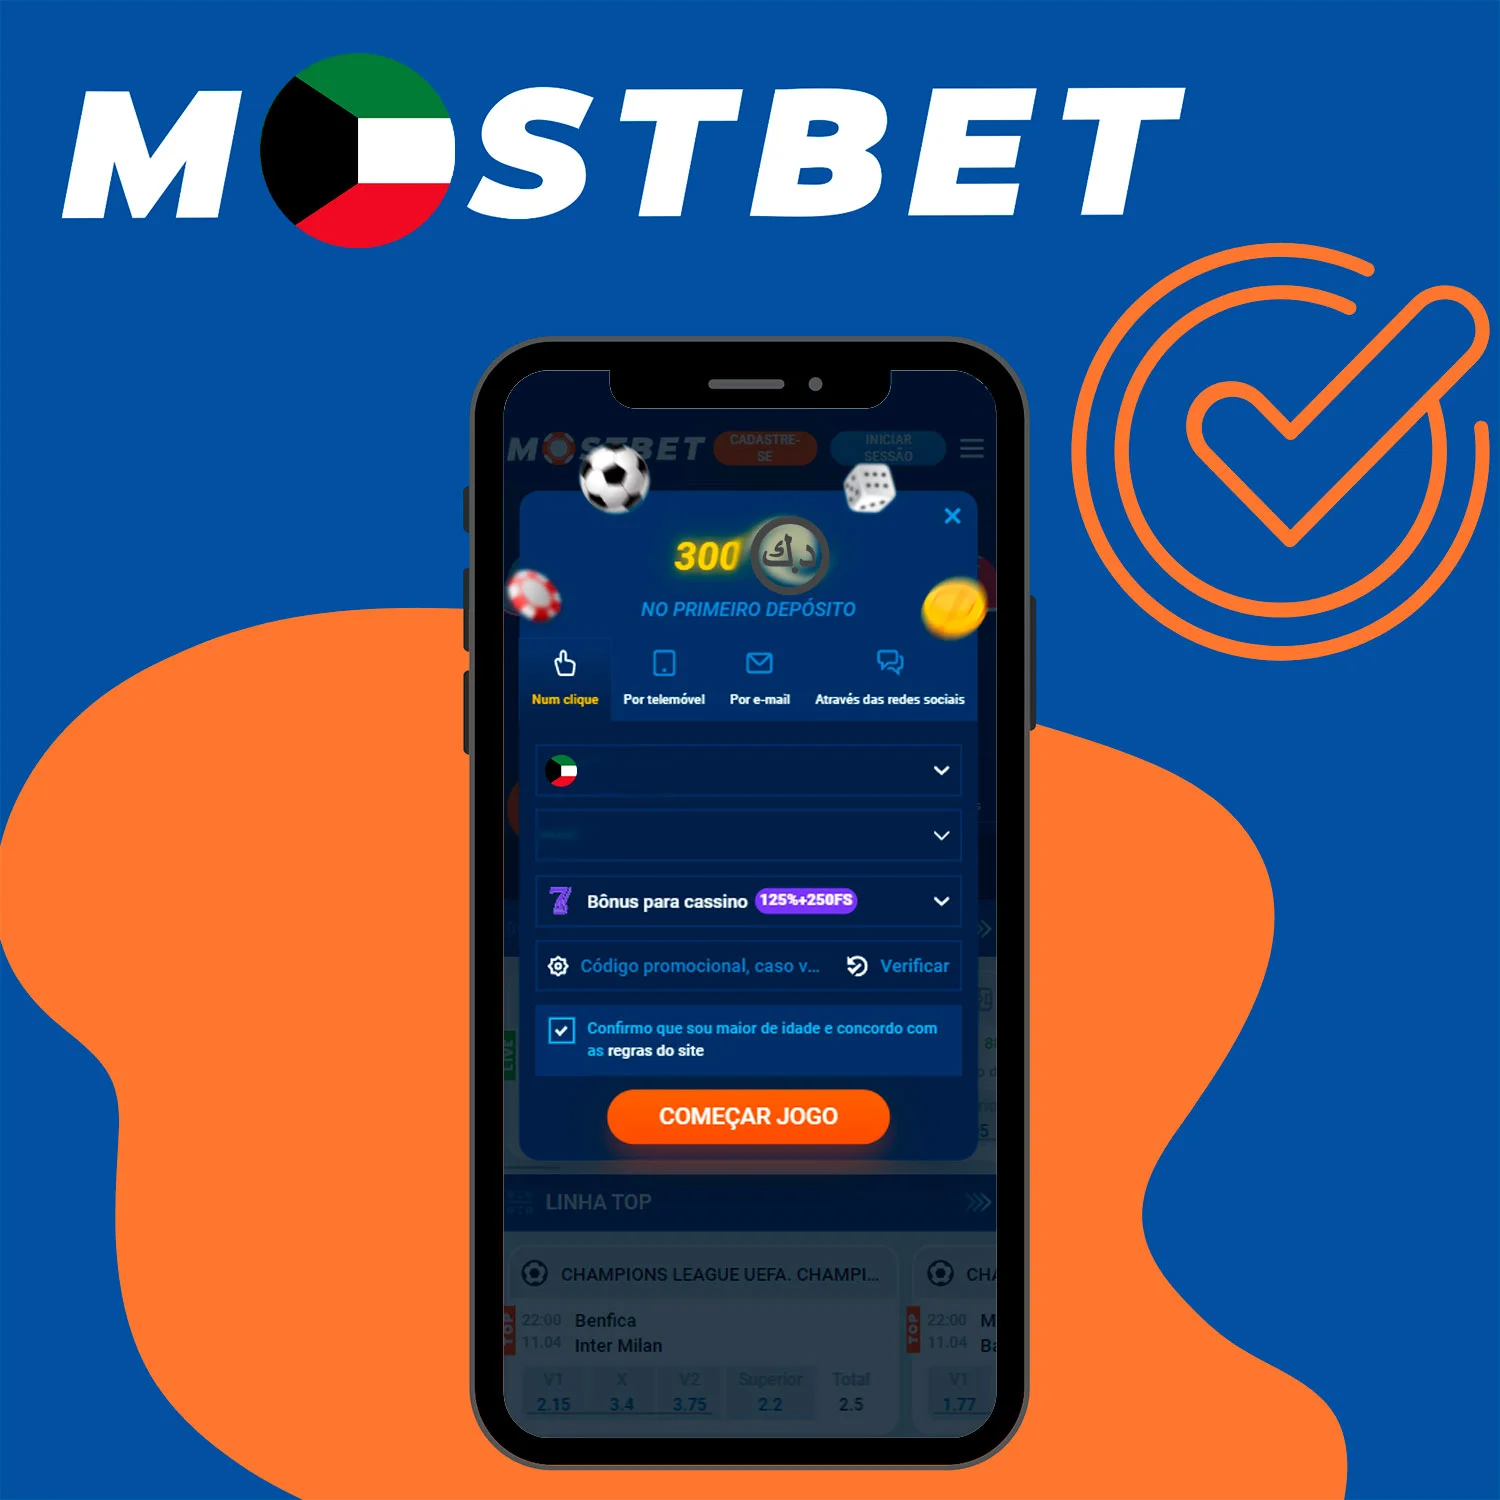 5 Ways You Can Get More Mostbet 27 bookmaker and casino in Bangladesh While Spending Less